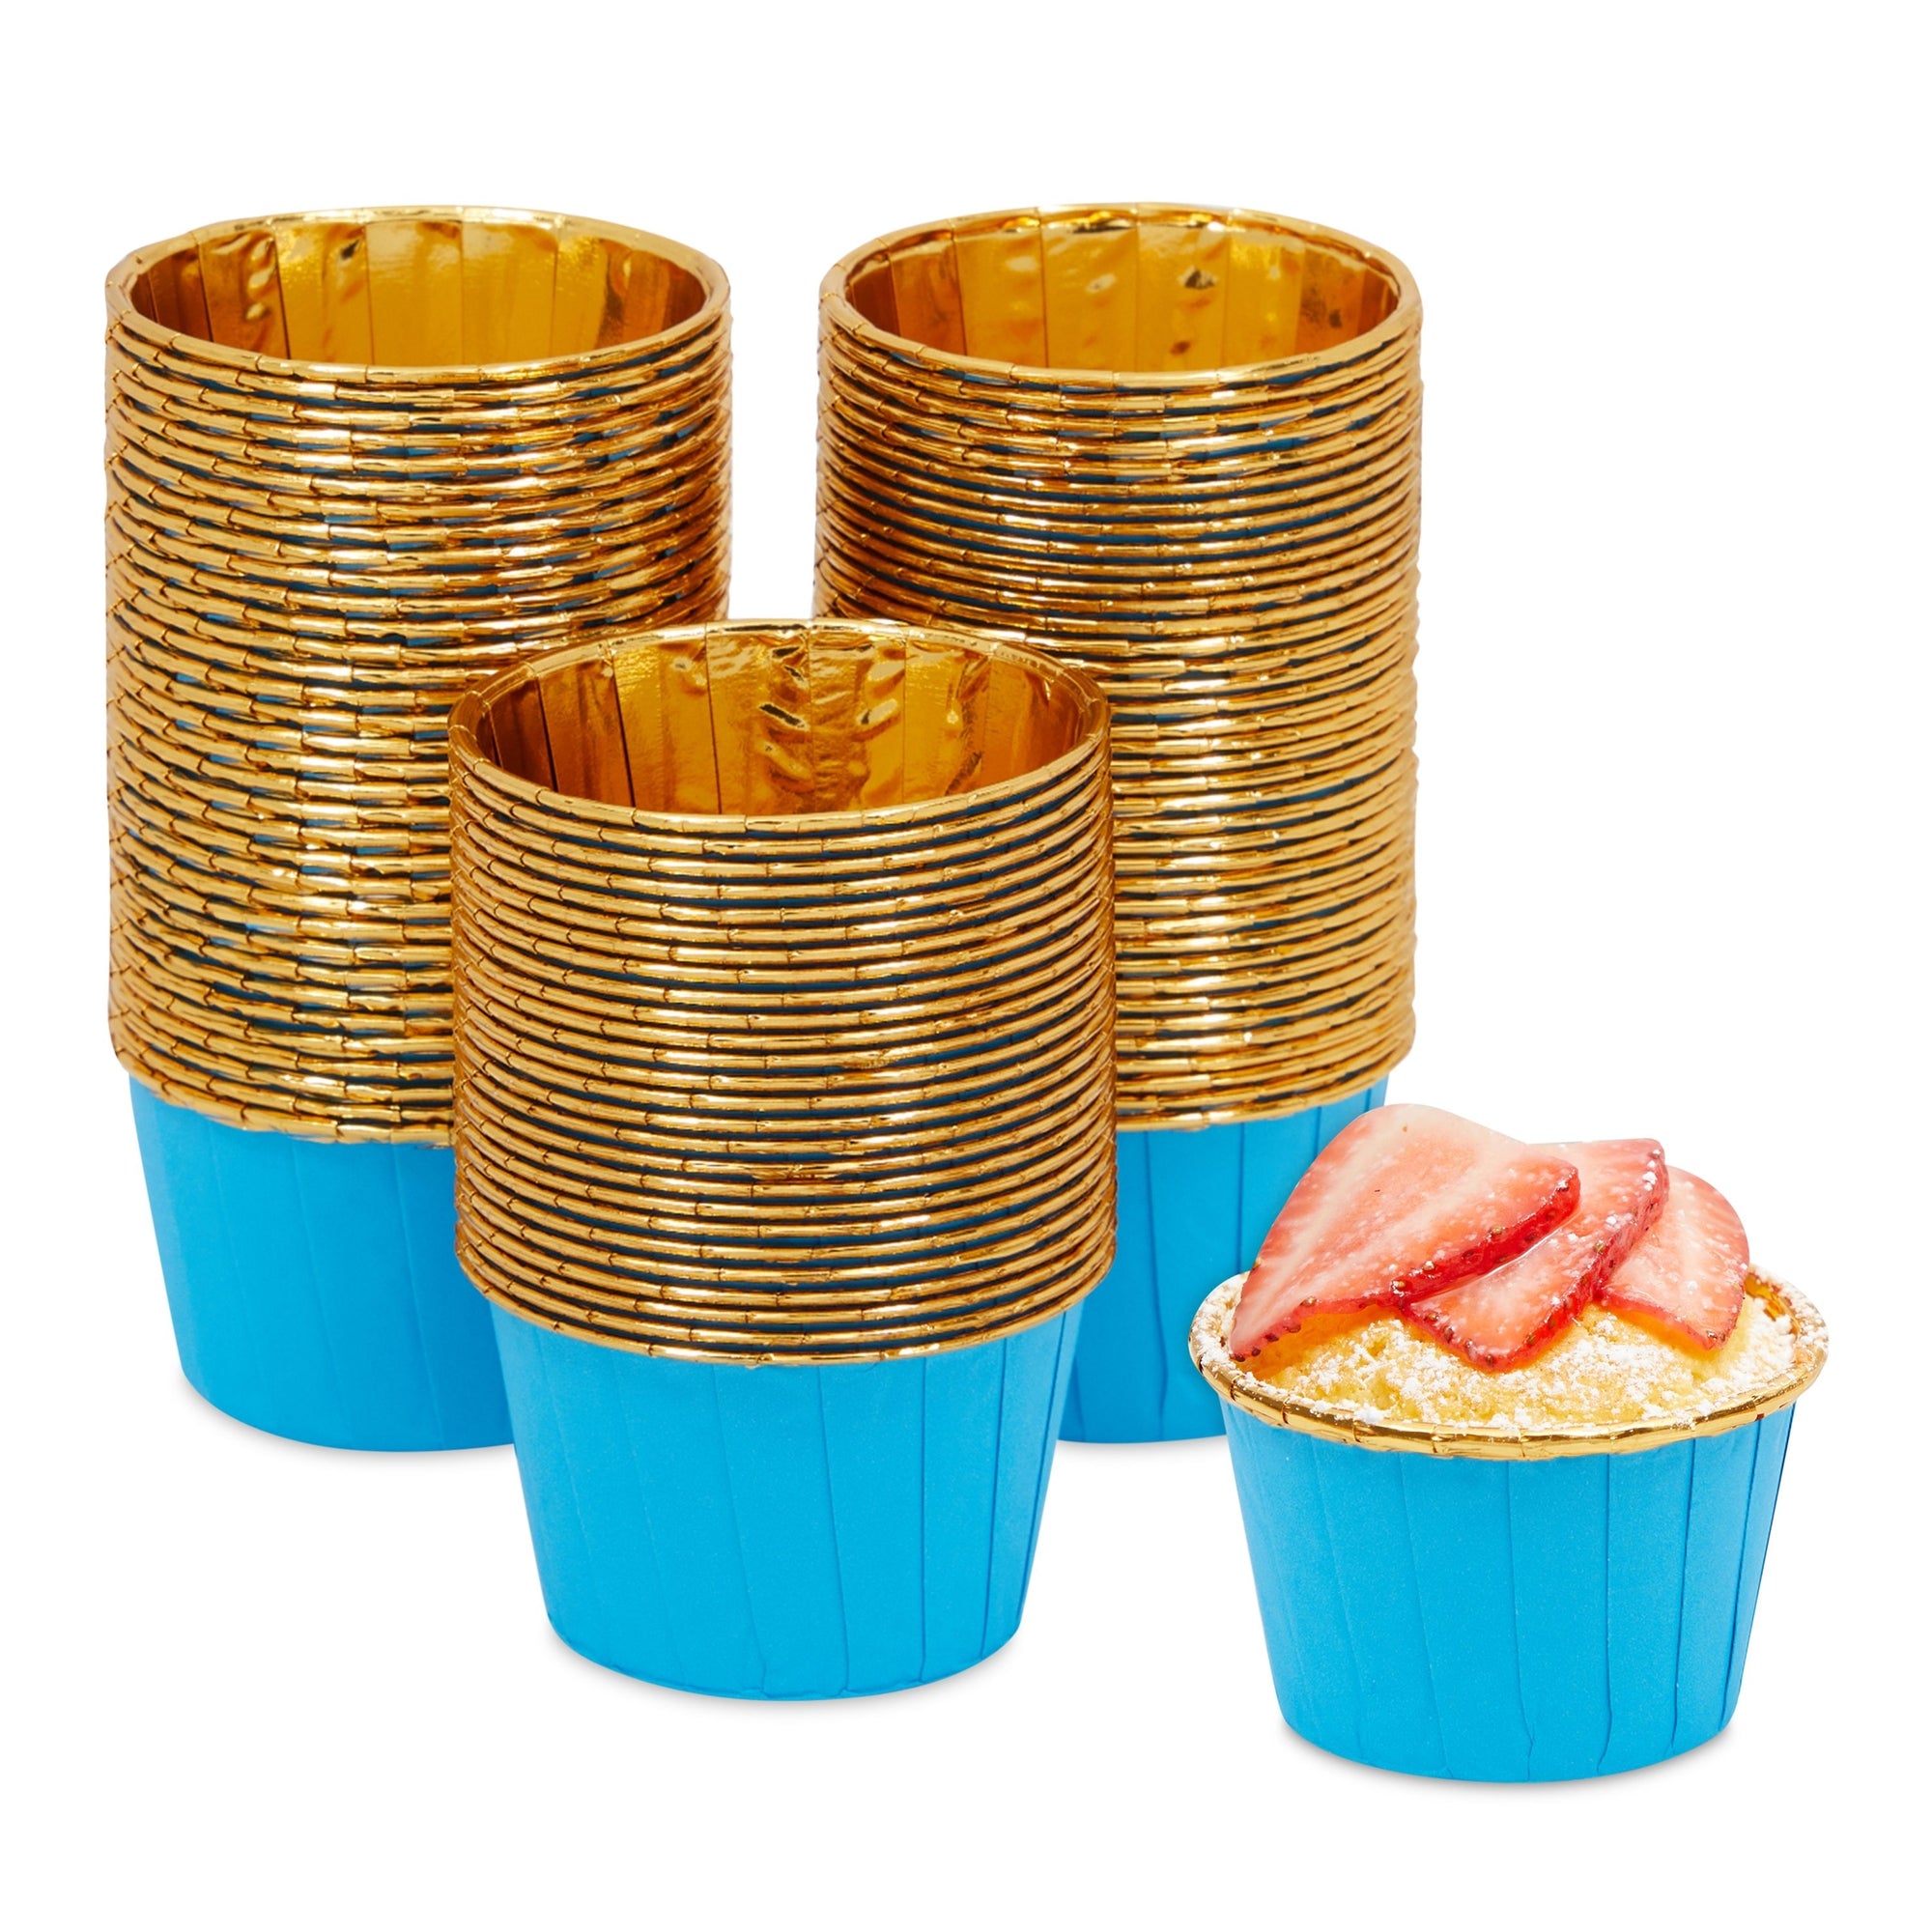 100-Pack Gold Aluminum Foil Cupcake Liners, 2.75x1.5-Inch Gold Colored Baking  Cups for Muffins and Baked Desserts, Small Goodie Containers for Loose Nuts  and Candies 